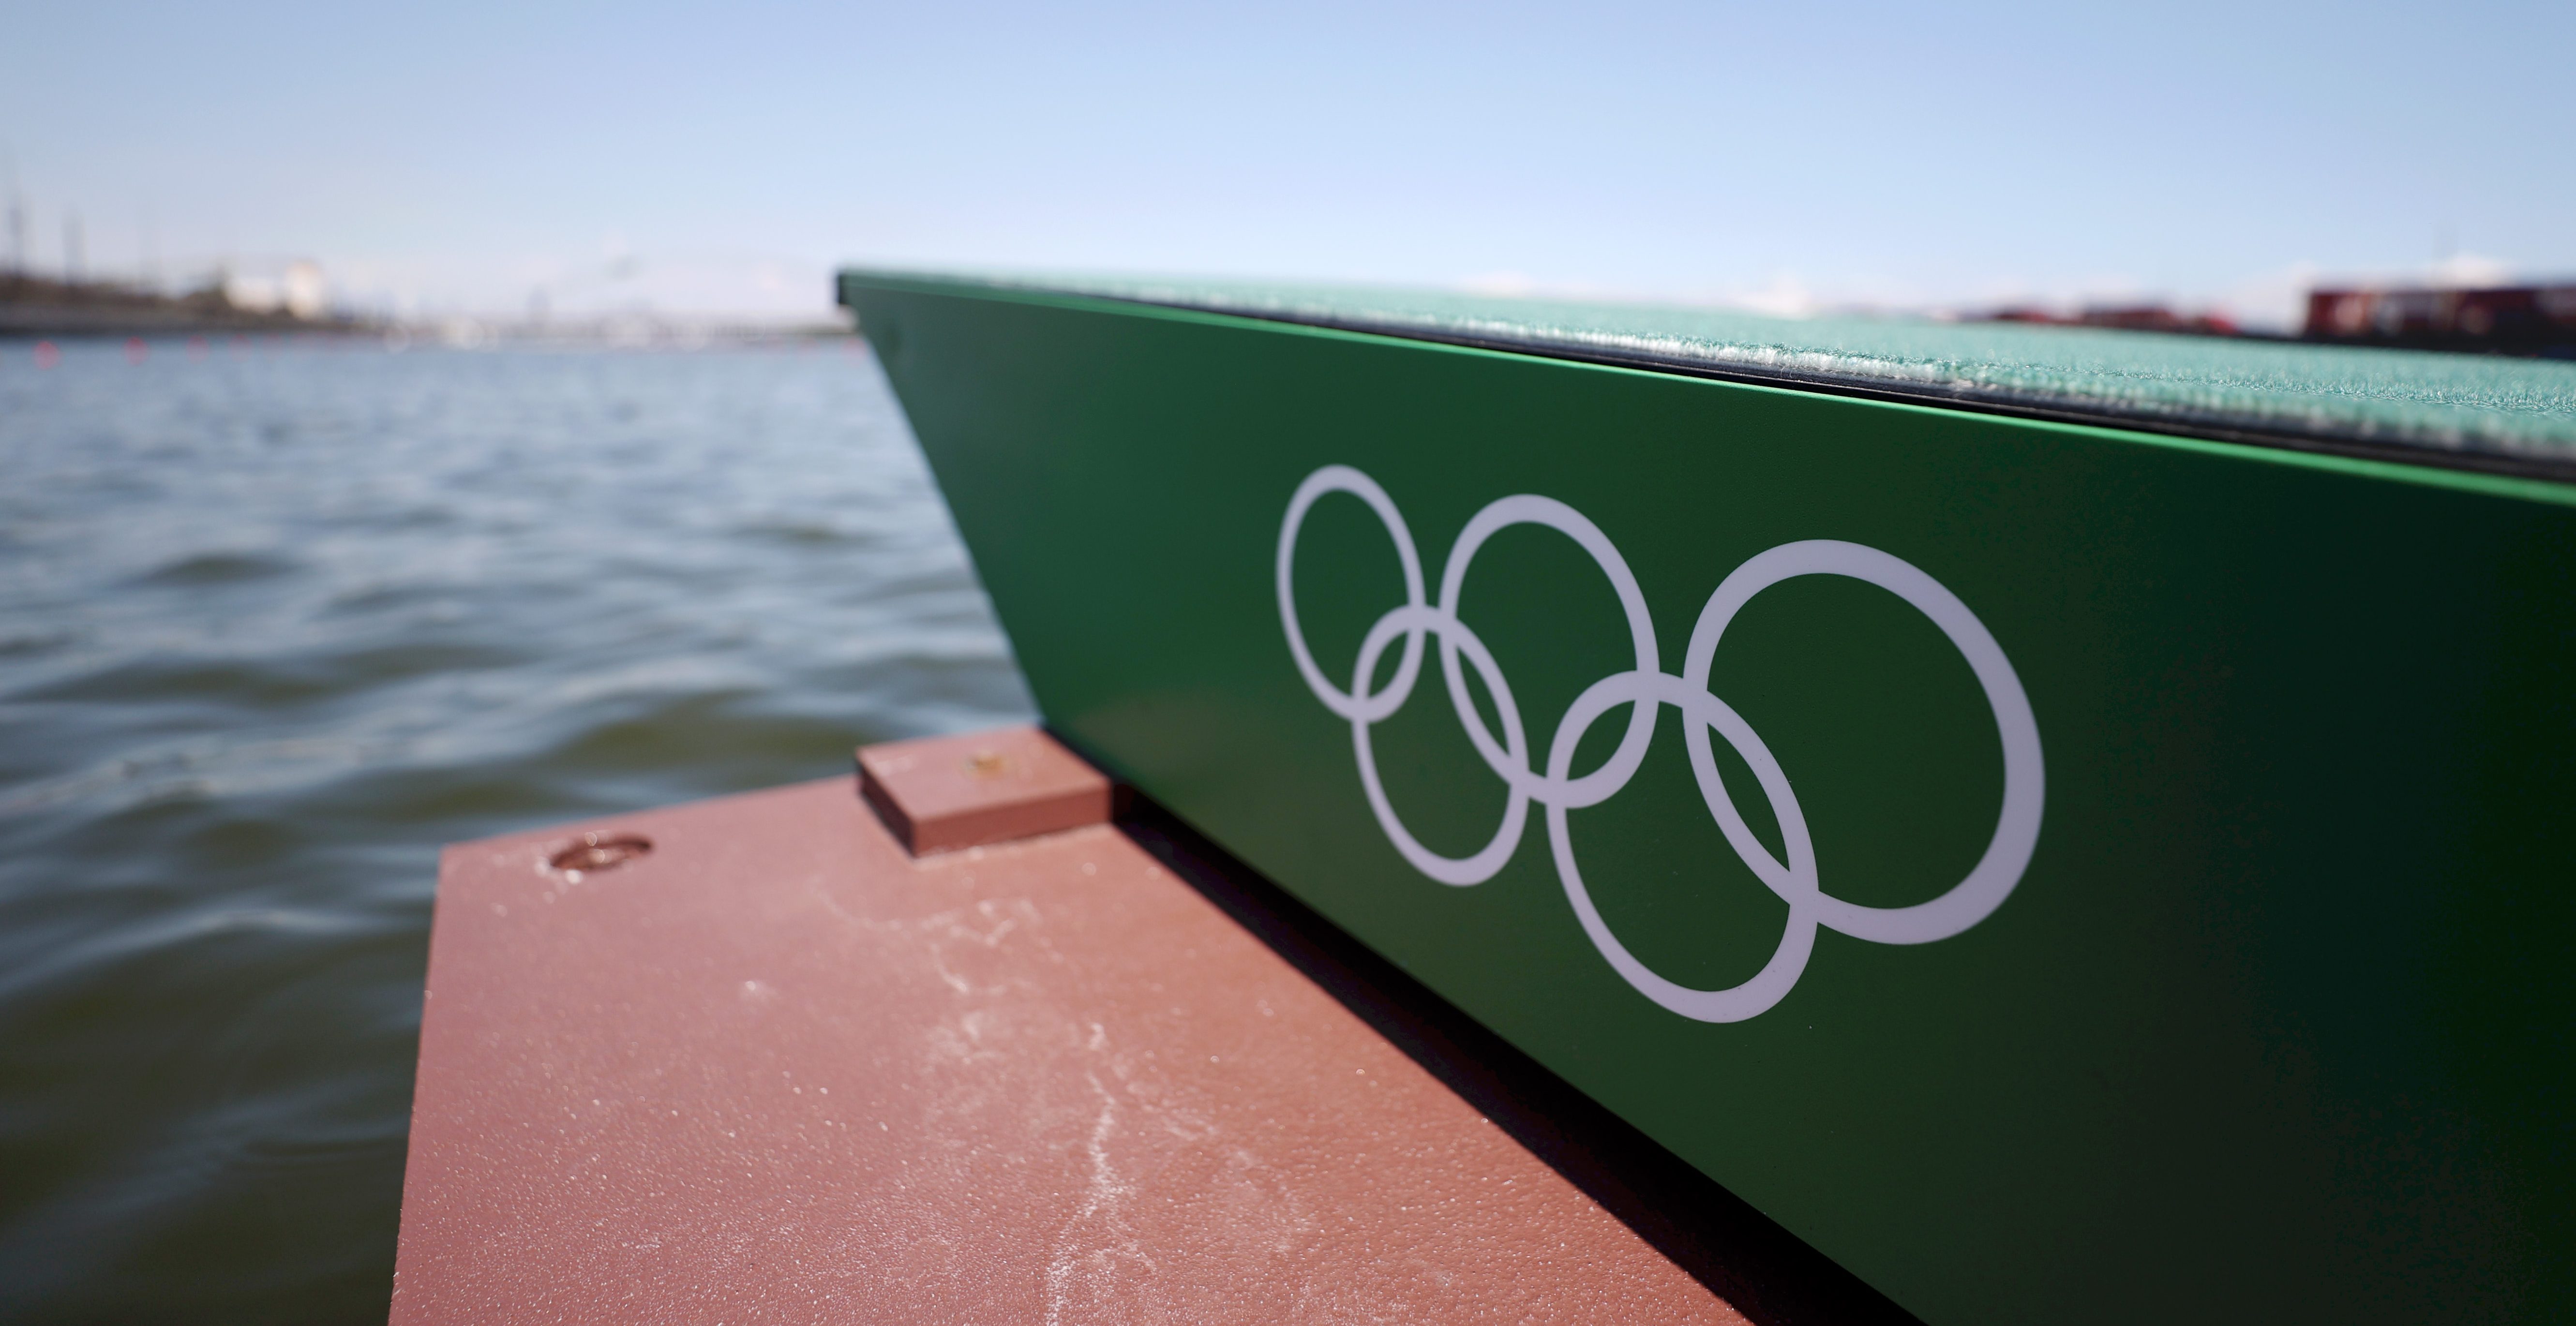 Abuse allegations against former Olympic rower, coach found to be
credible, US Rowing probe says